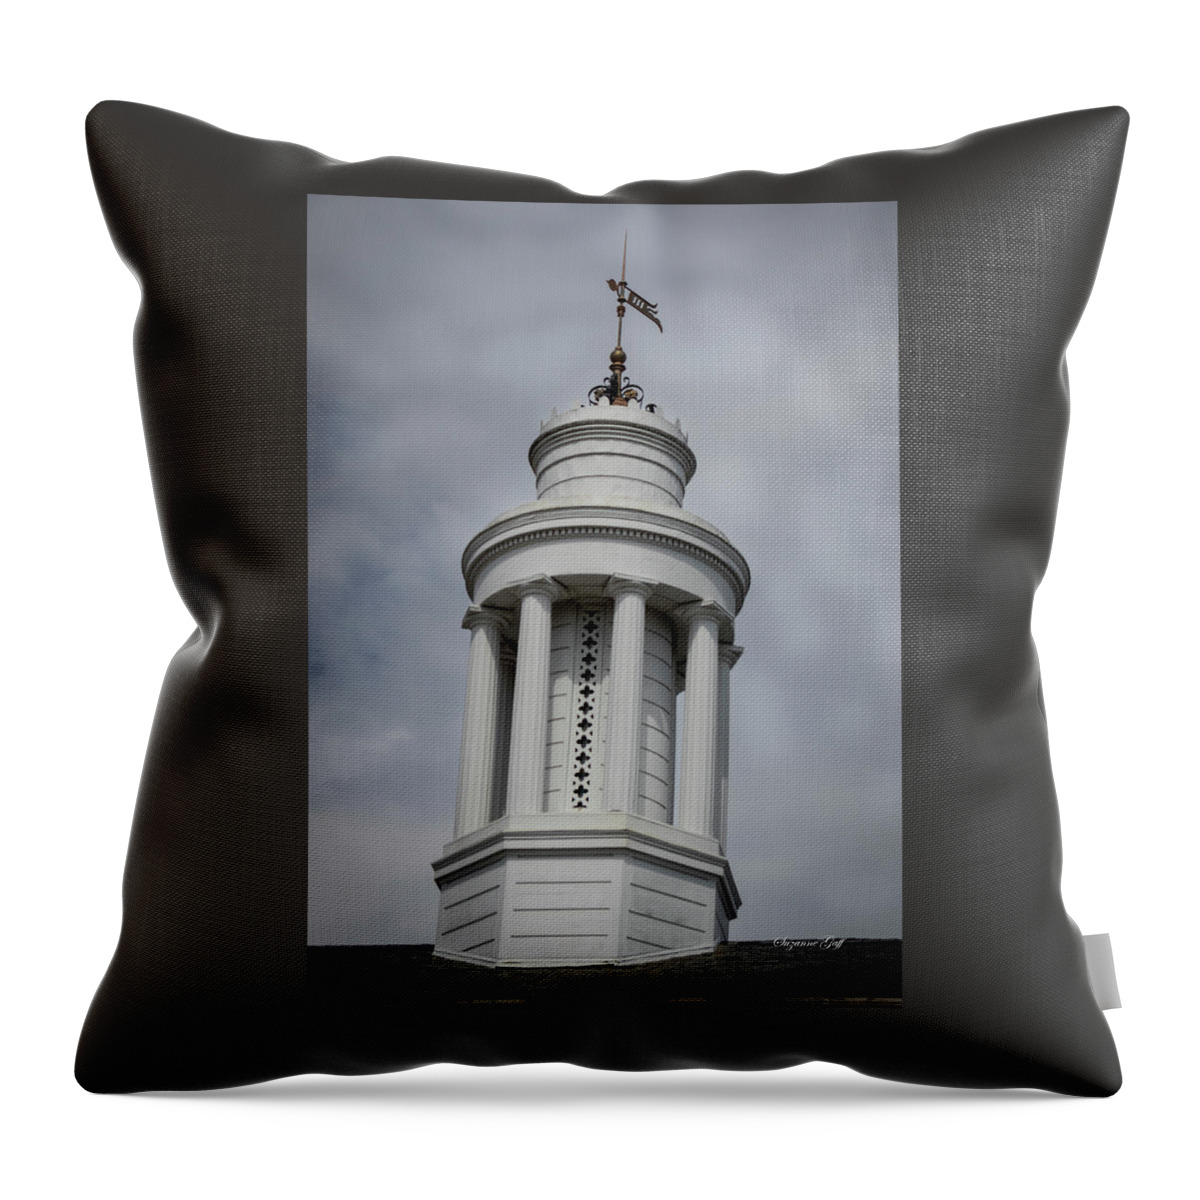 Photograph Throw Pillow featuring the photograph Cupola with Weathervane by Suzanne Gaff